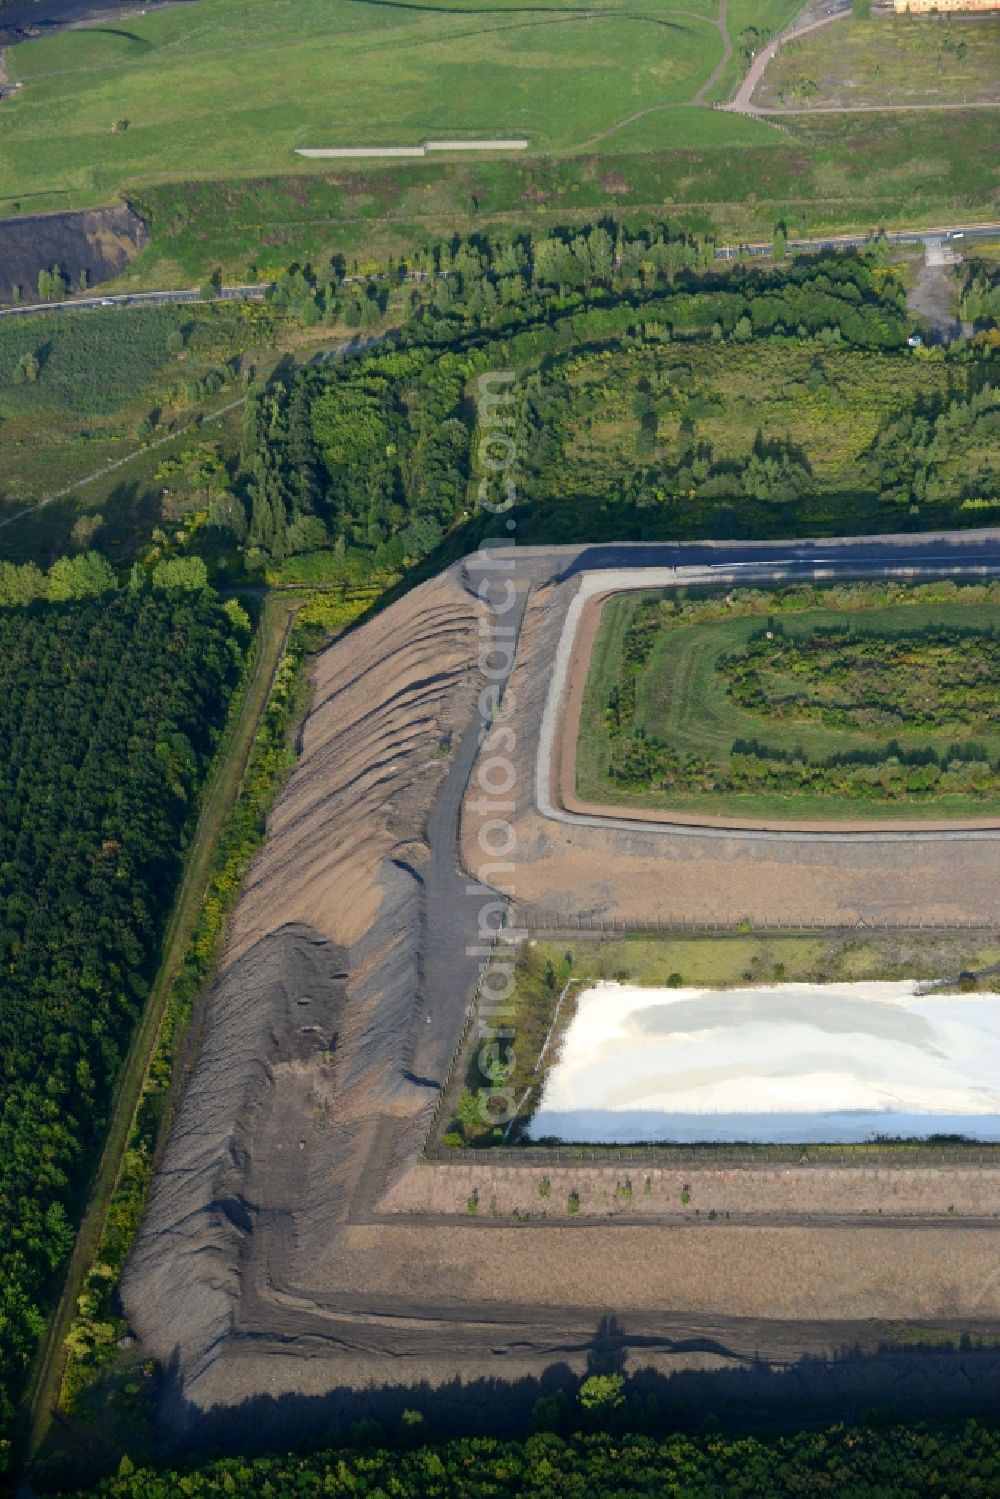 Aerial photograph Helbra - Gras hill and mining facilities in the South of Helbra in the state of Saxony-Anhalt. The hill and the pool with chalk and limescale are located in the South of Helbra, in its industrial area